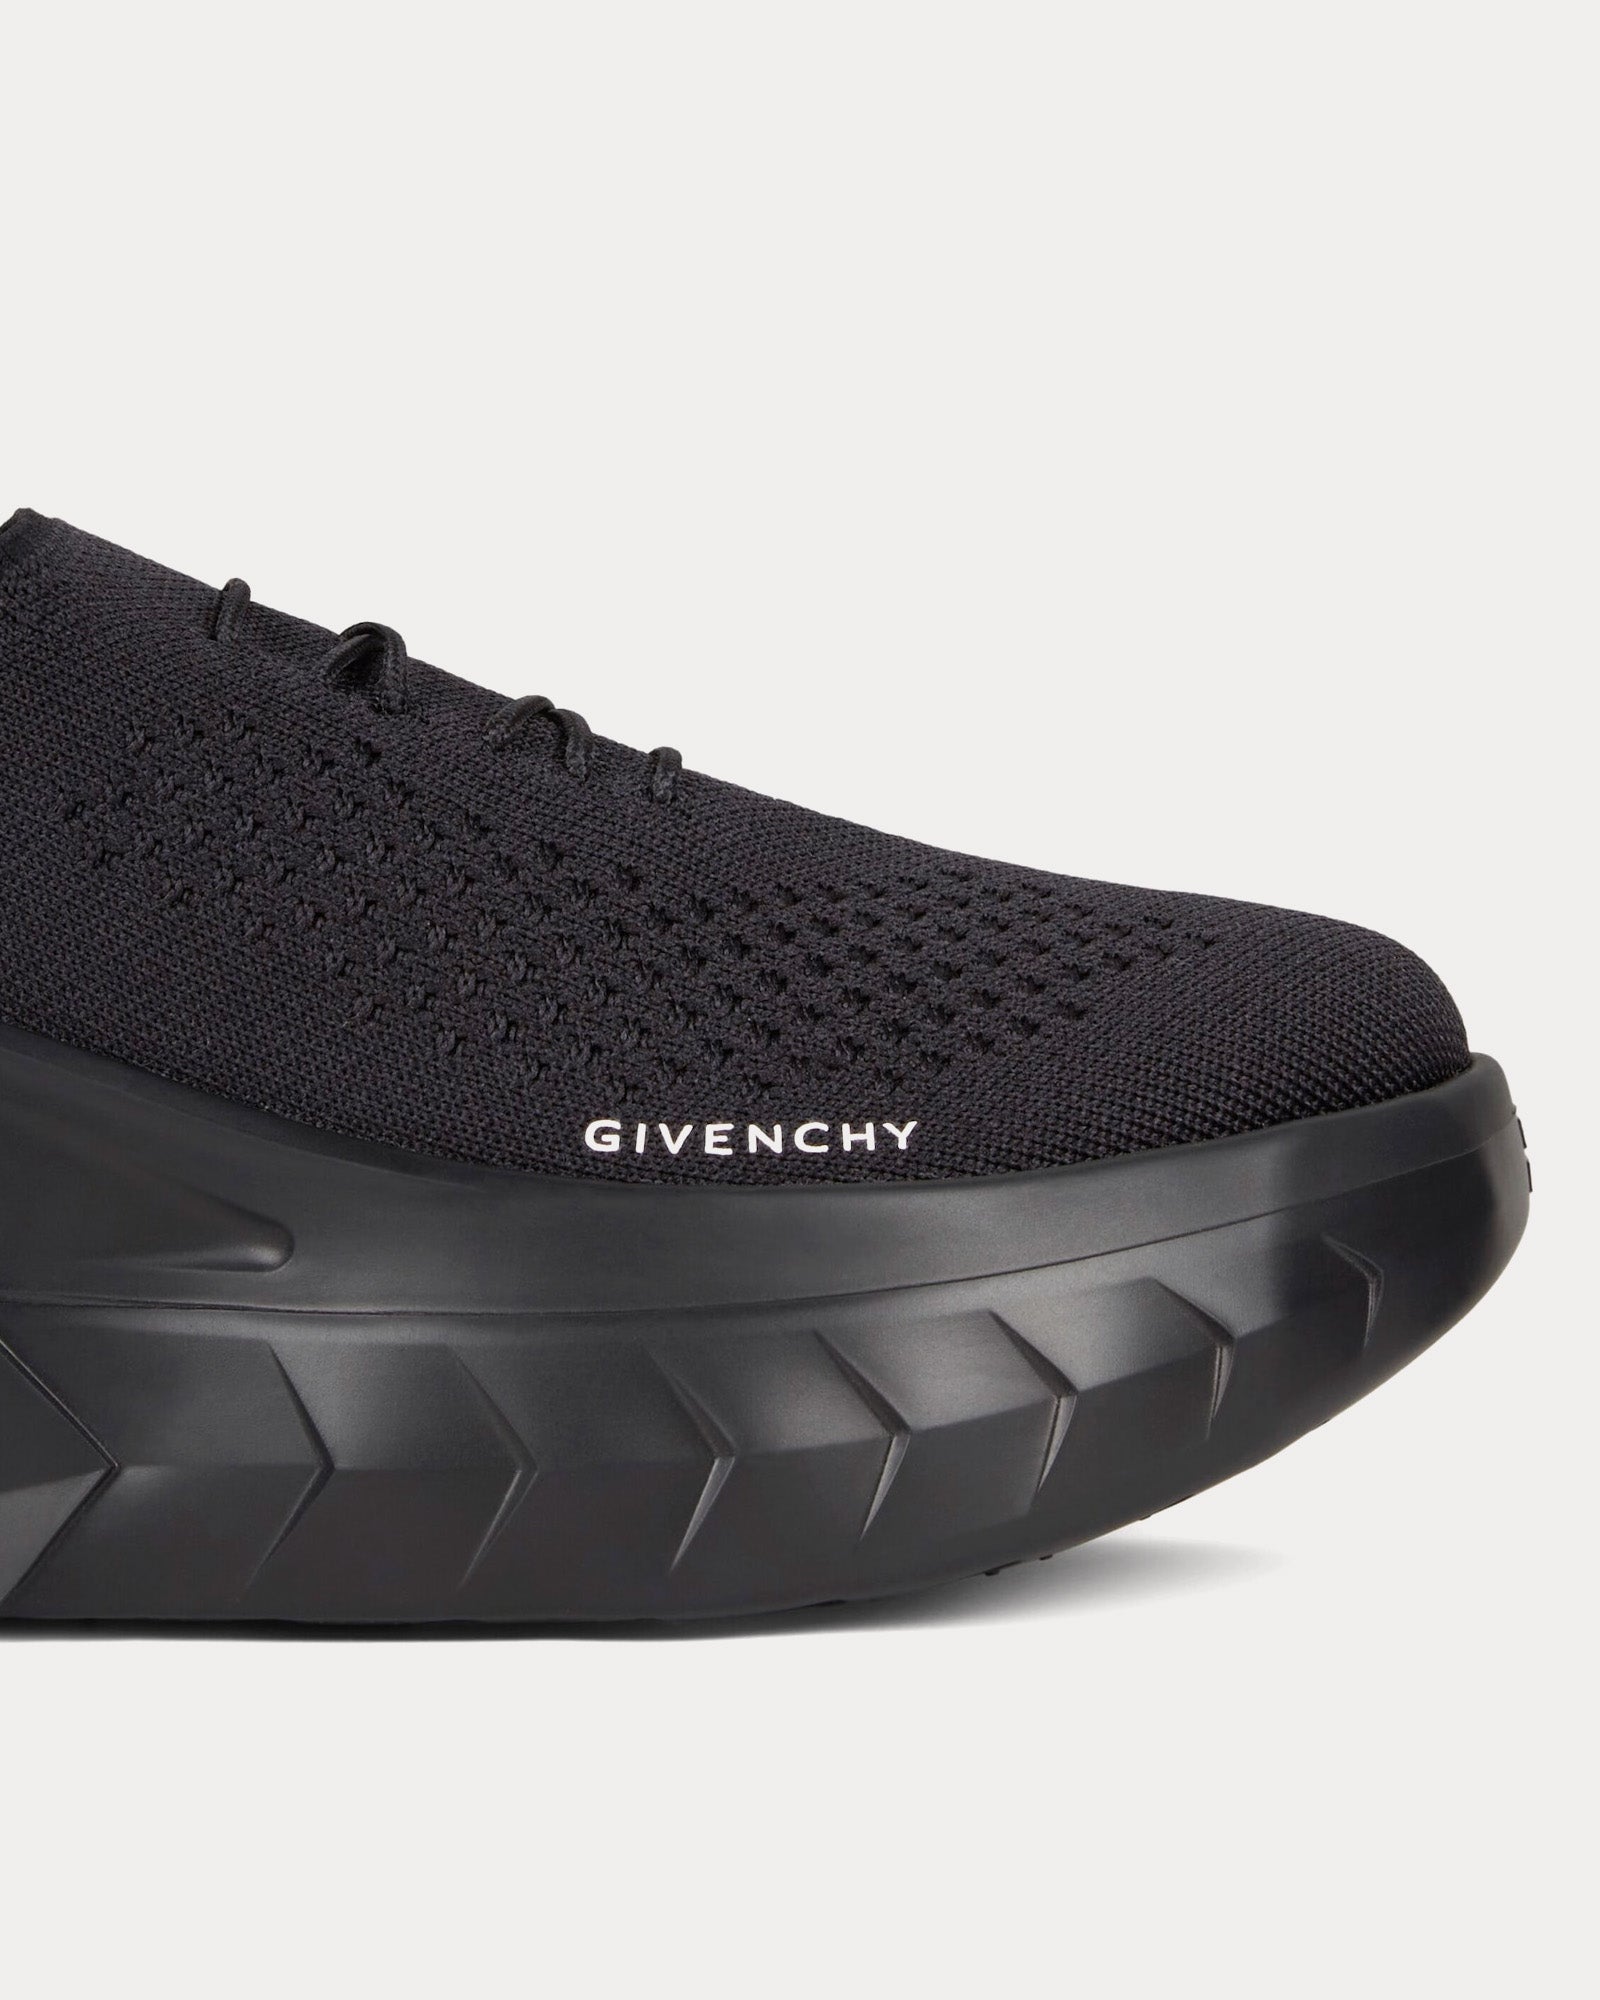 Givenchy - Marshmallow Wedge Rubber & Knit Black Low Top Sneakers